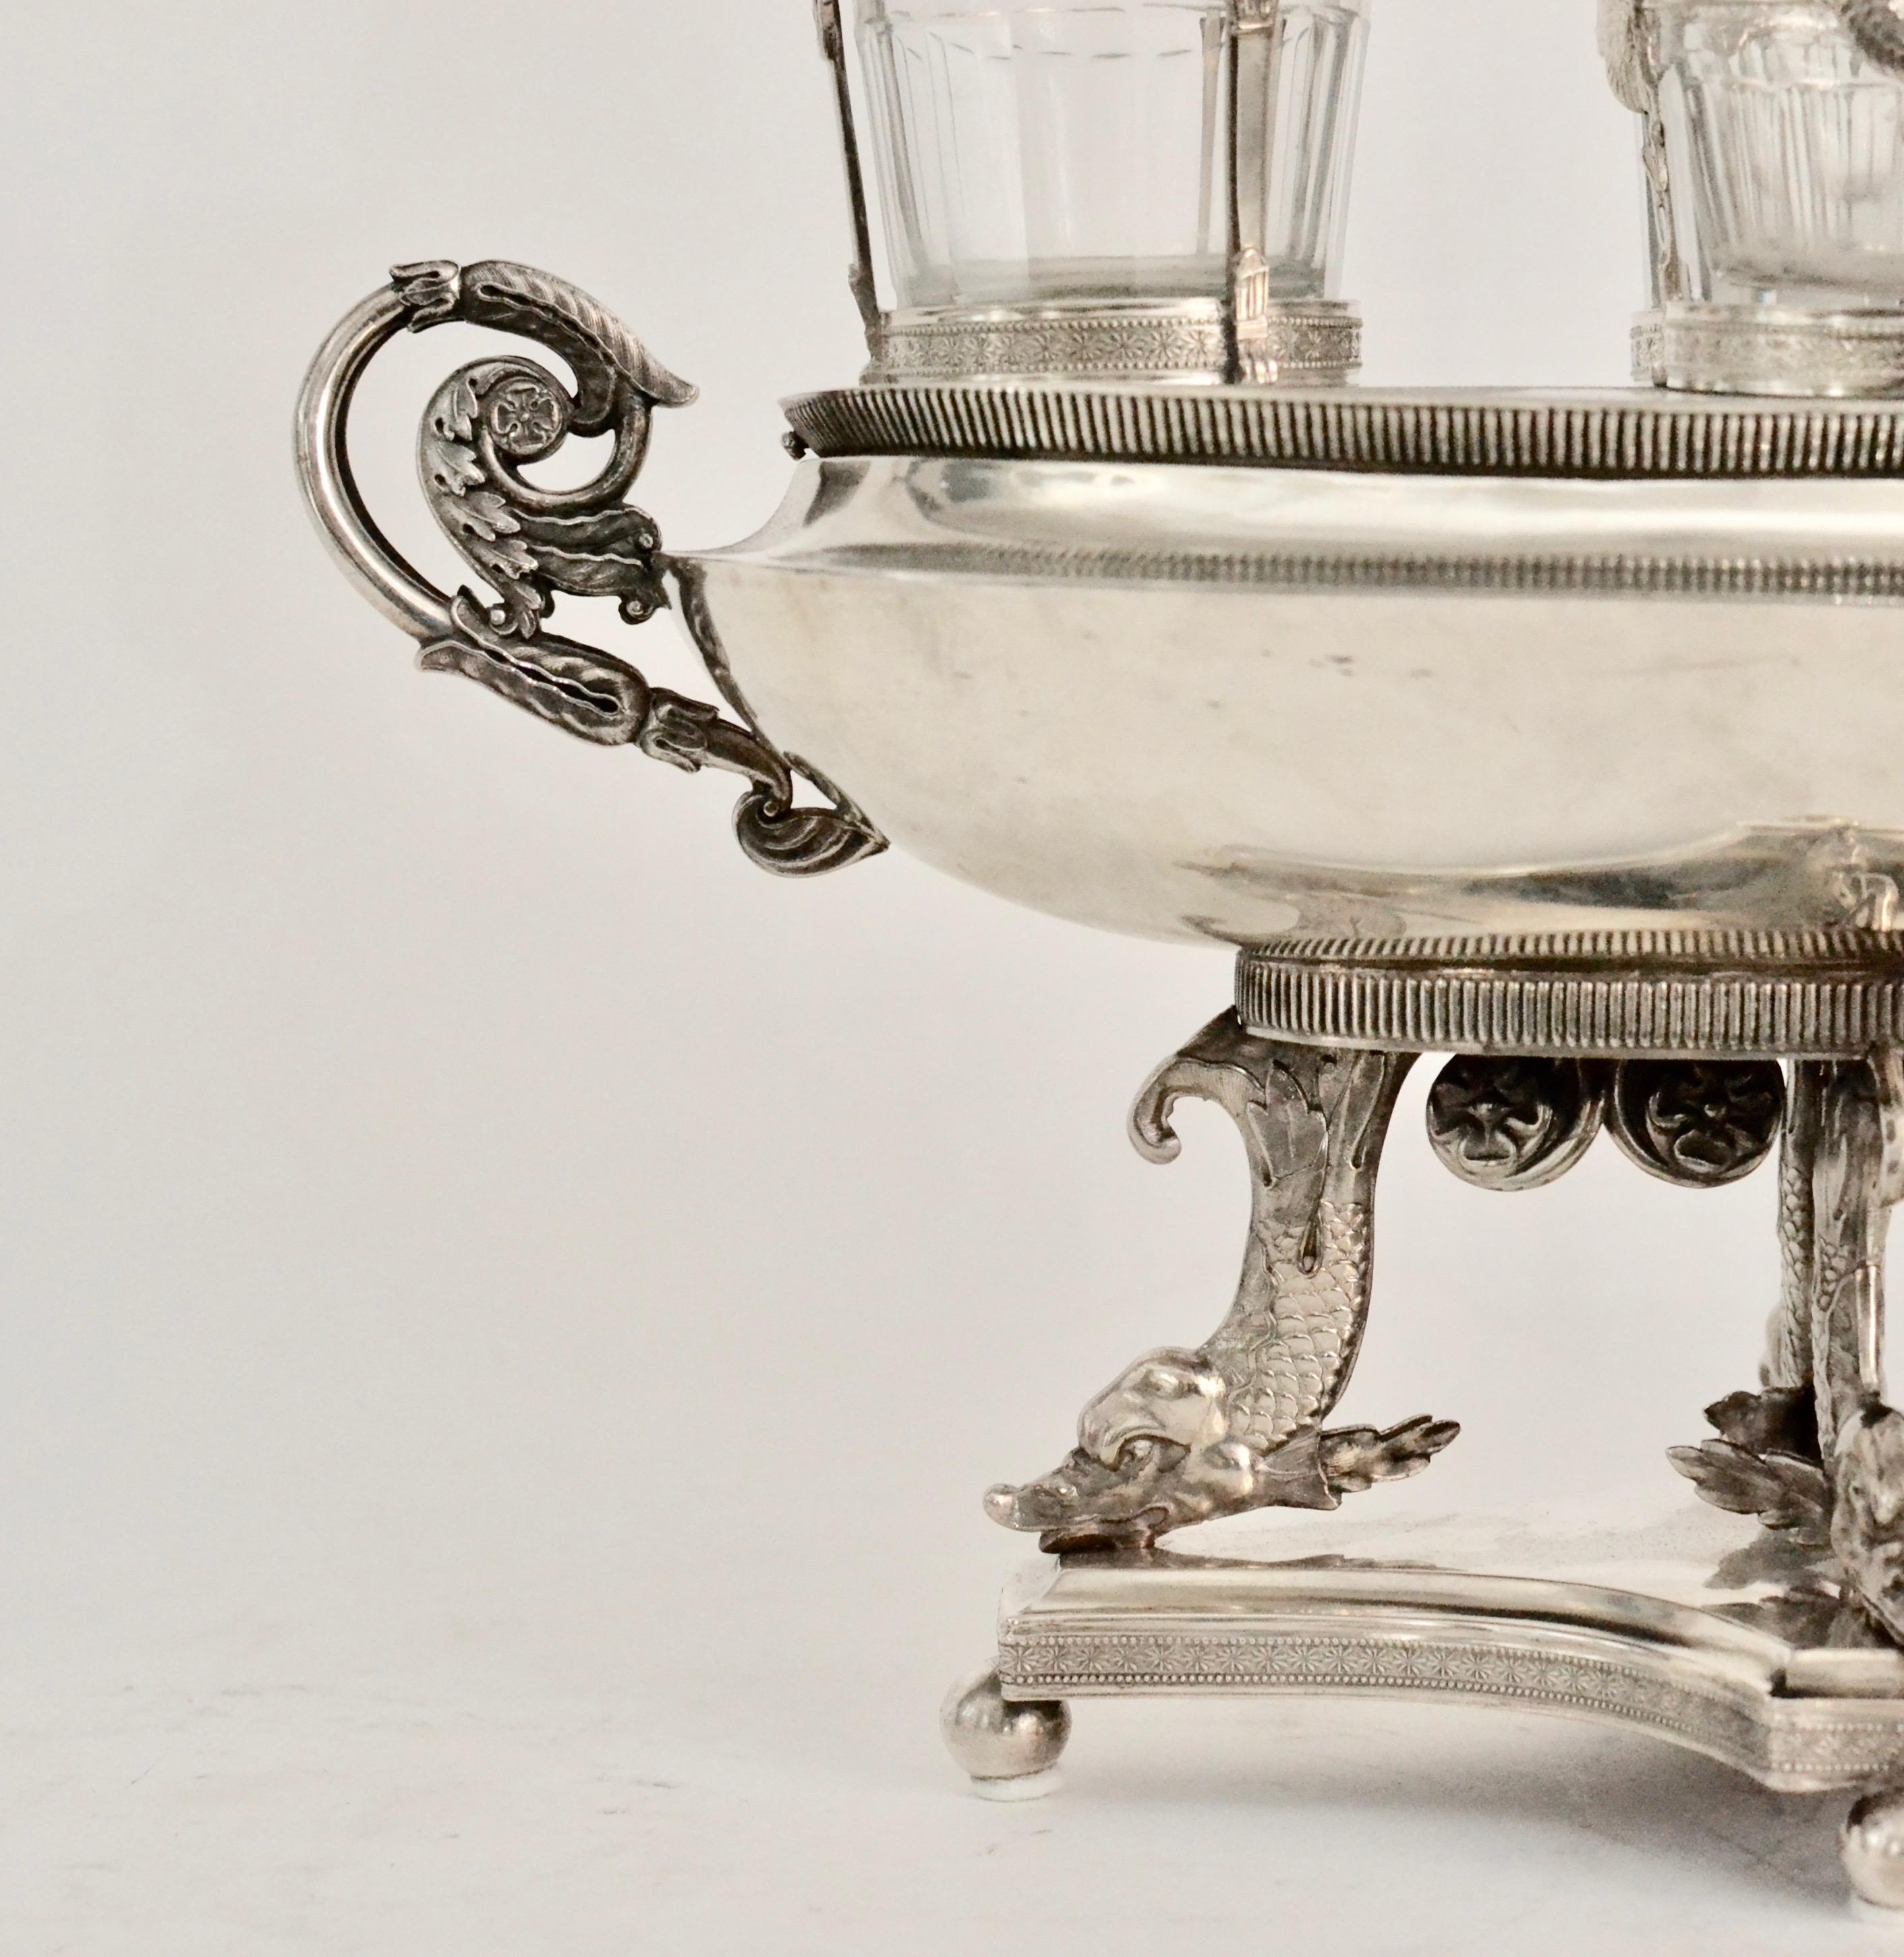 Early 19th Century Swedish Empire Silver Cruet by Anders Lindqvist, Stockholm, 1822